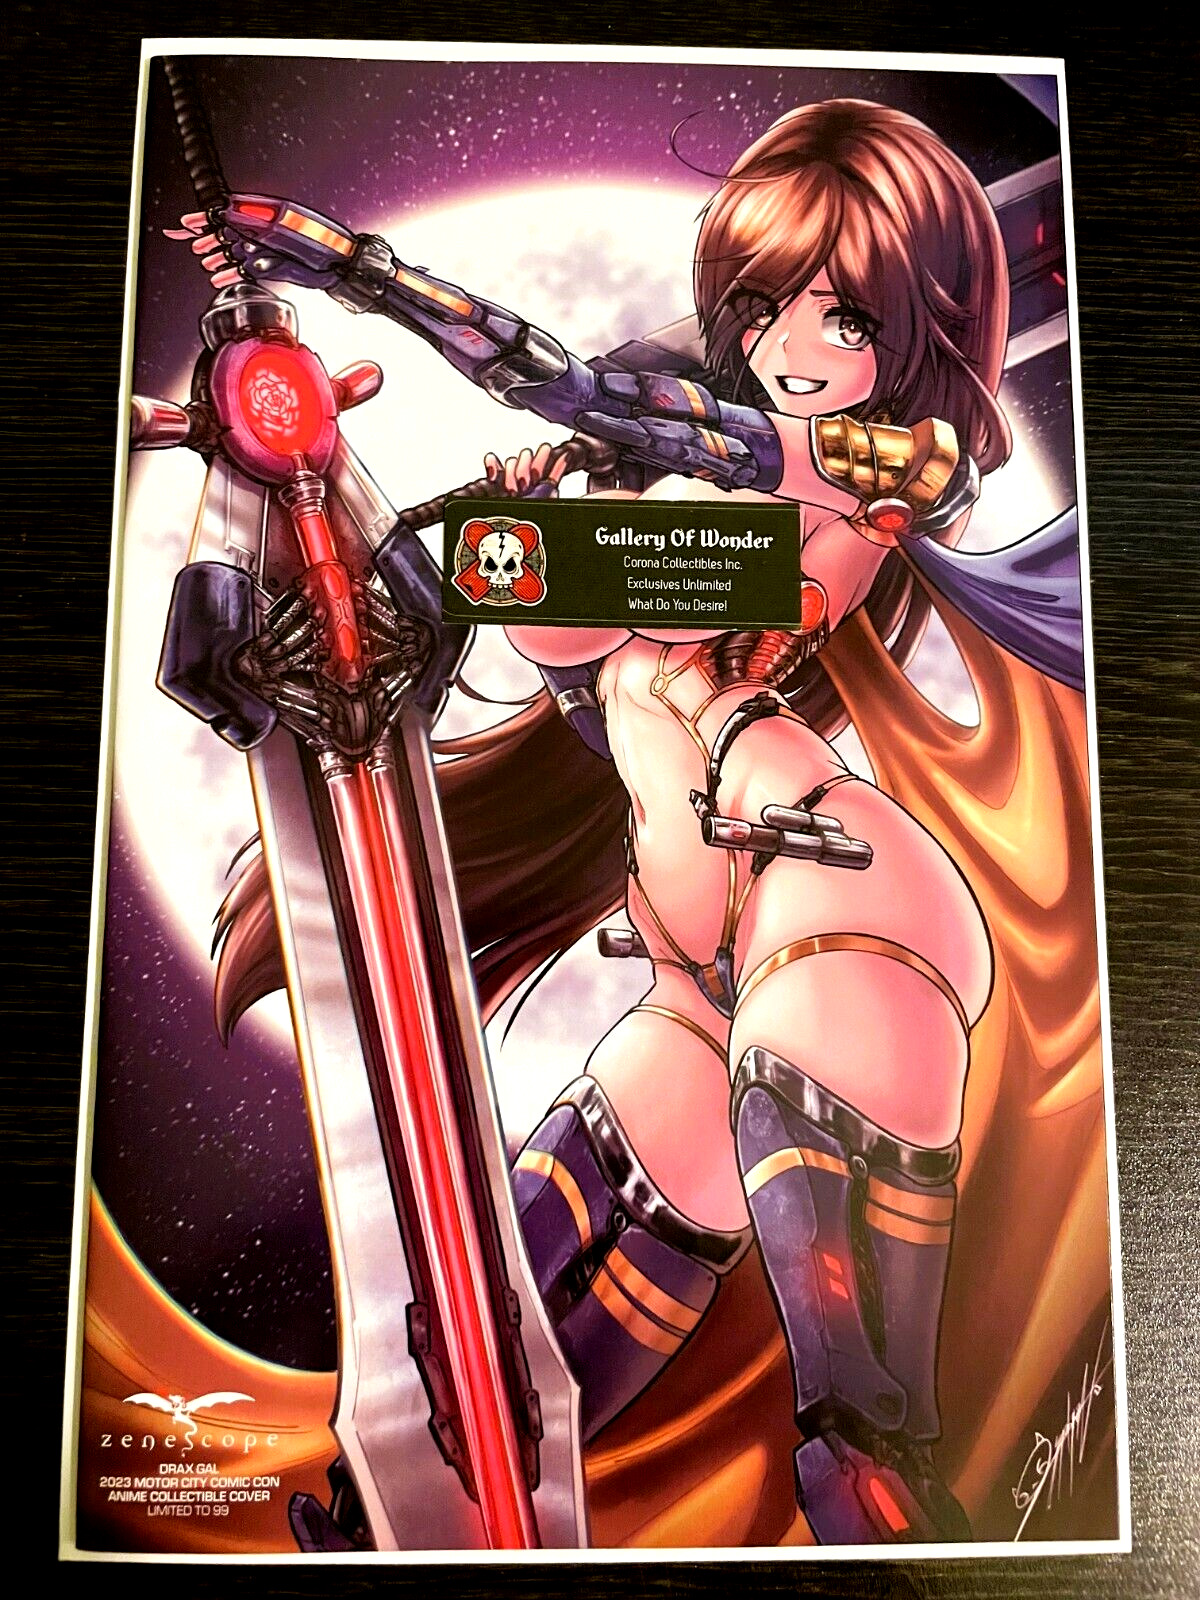 ZENESCOPE #1 DRAX GAL MOTOR CITY CC EXCLUSIVE ANIME Z-RATED COVER LTD 99 NM+